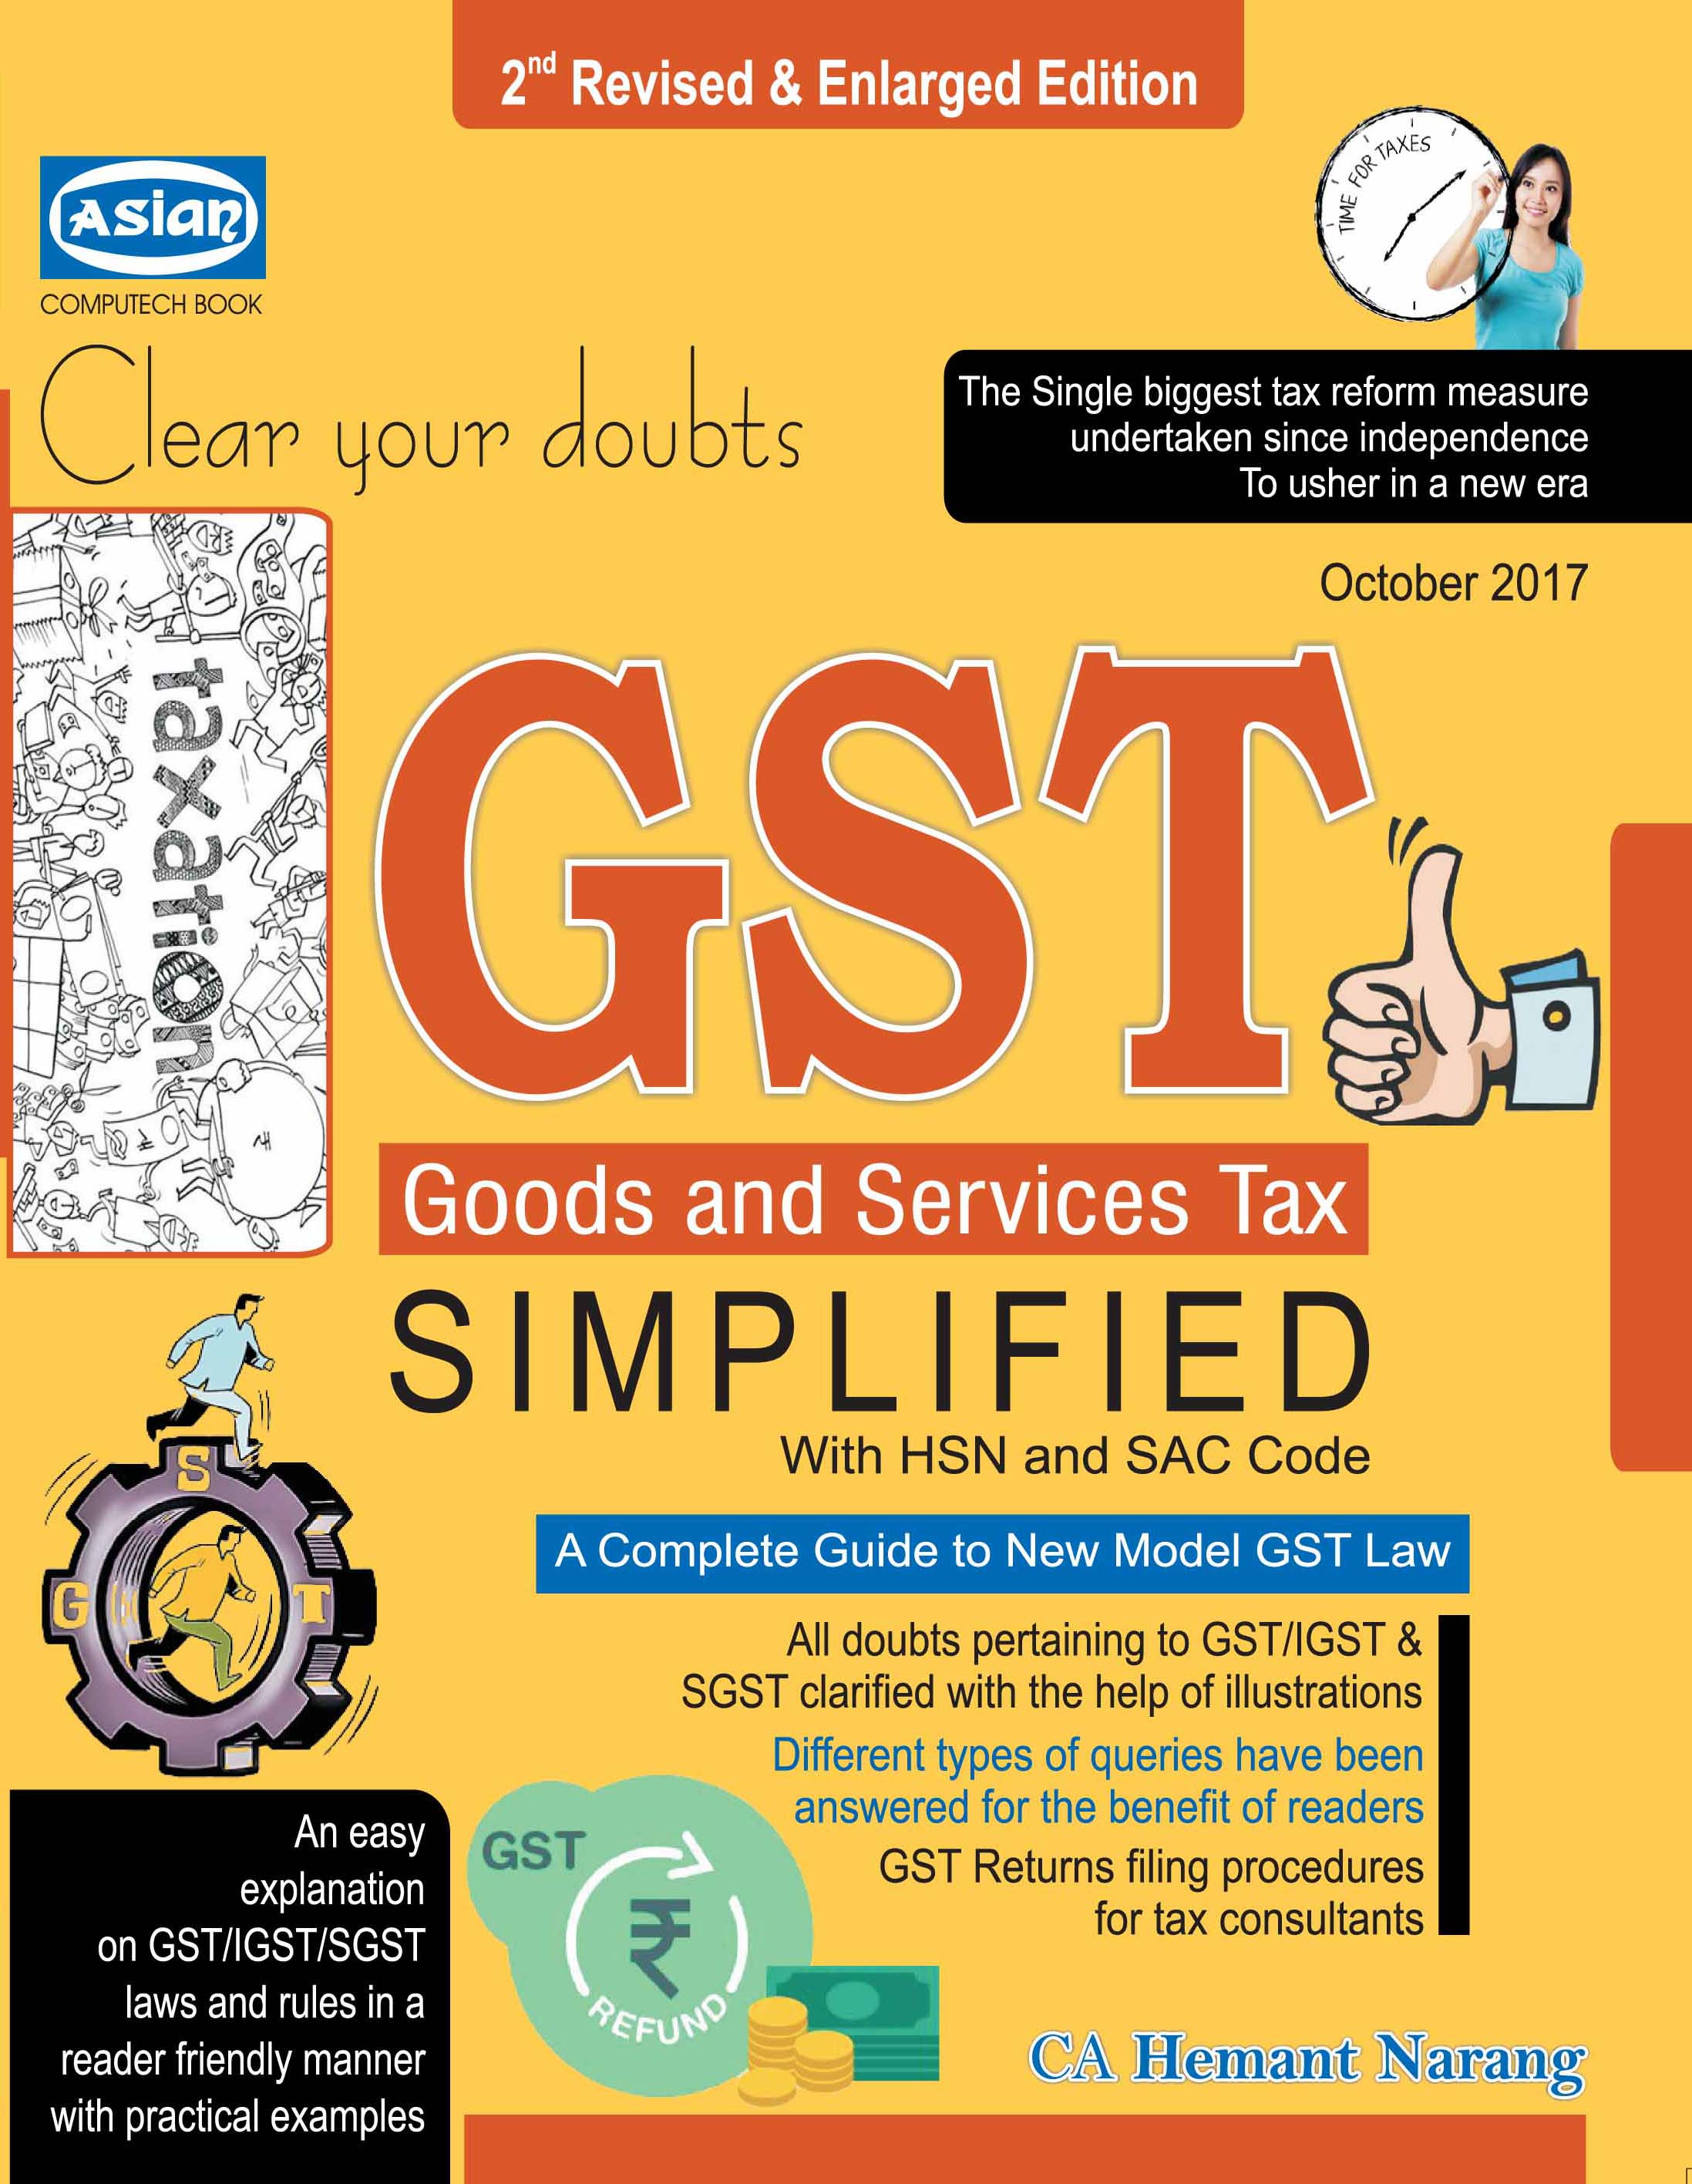 research article on gst